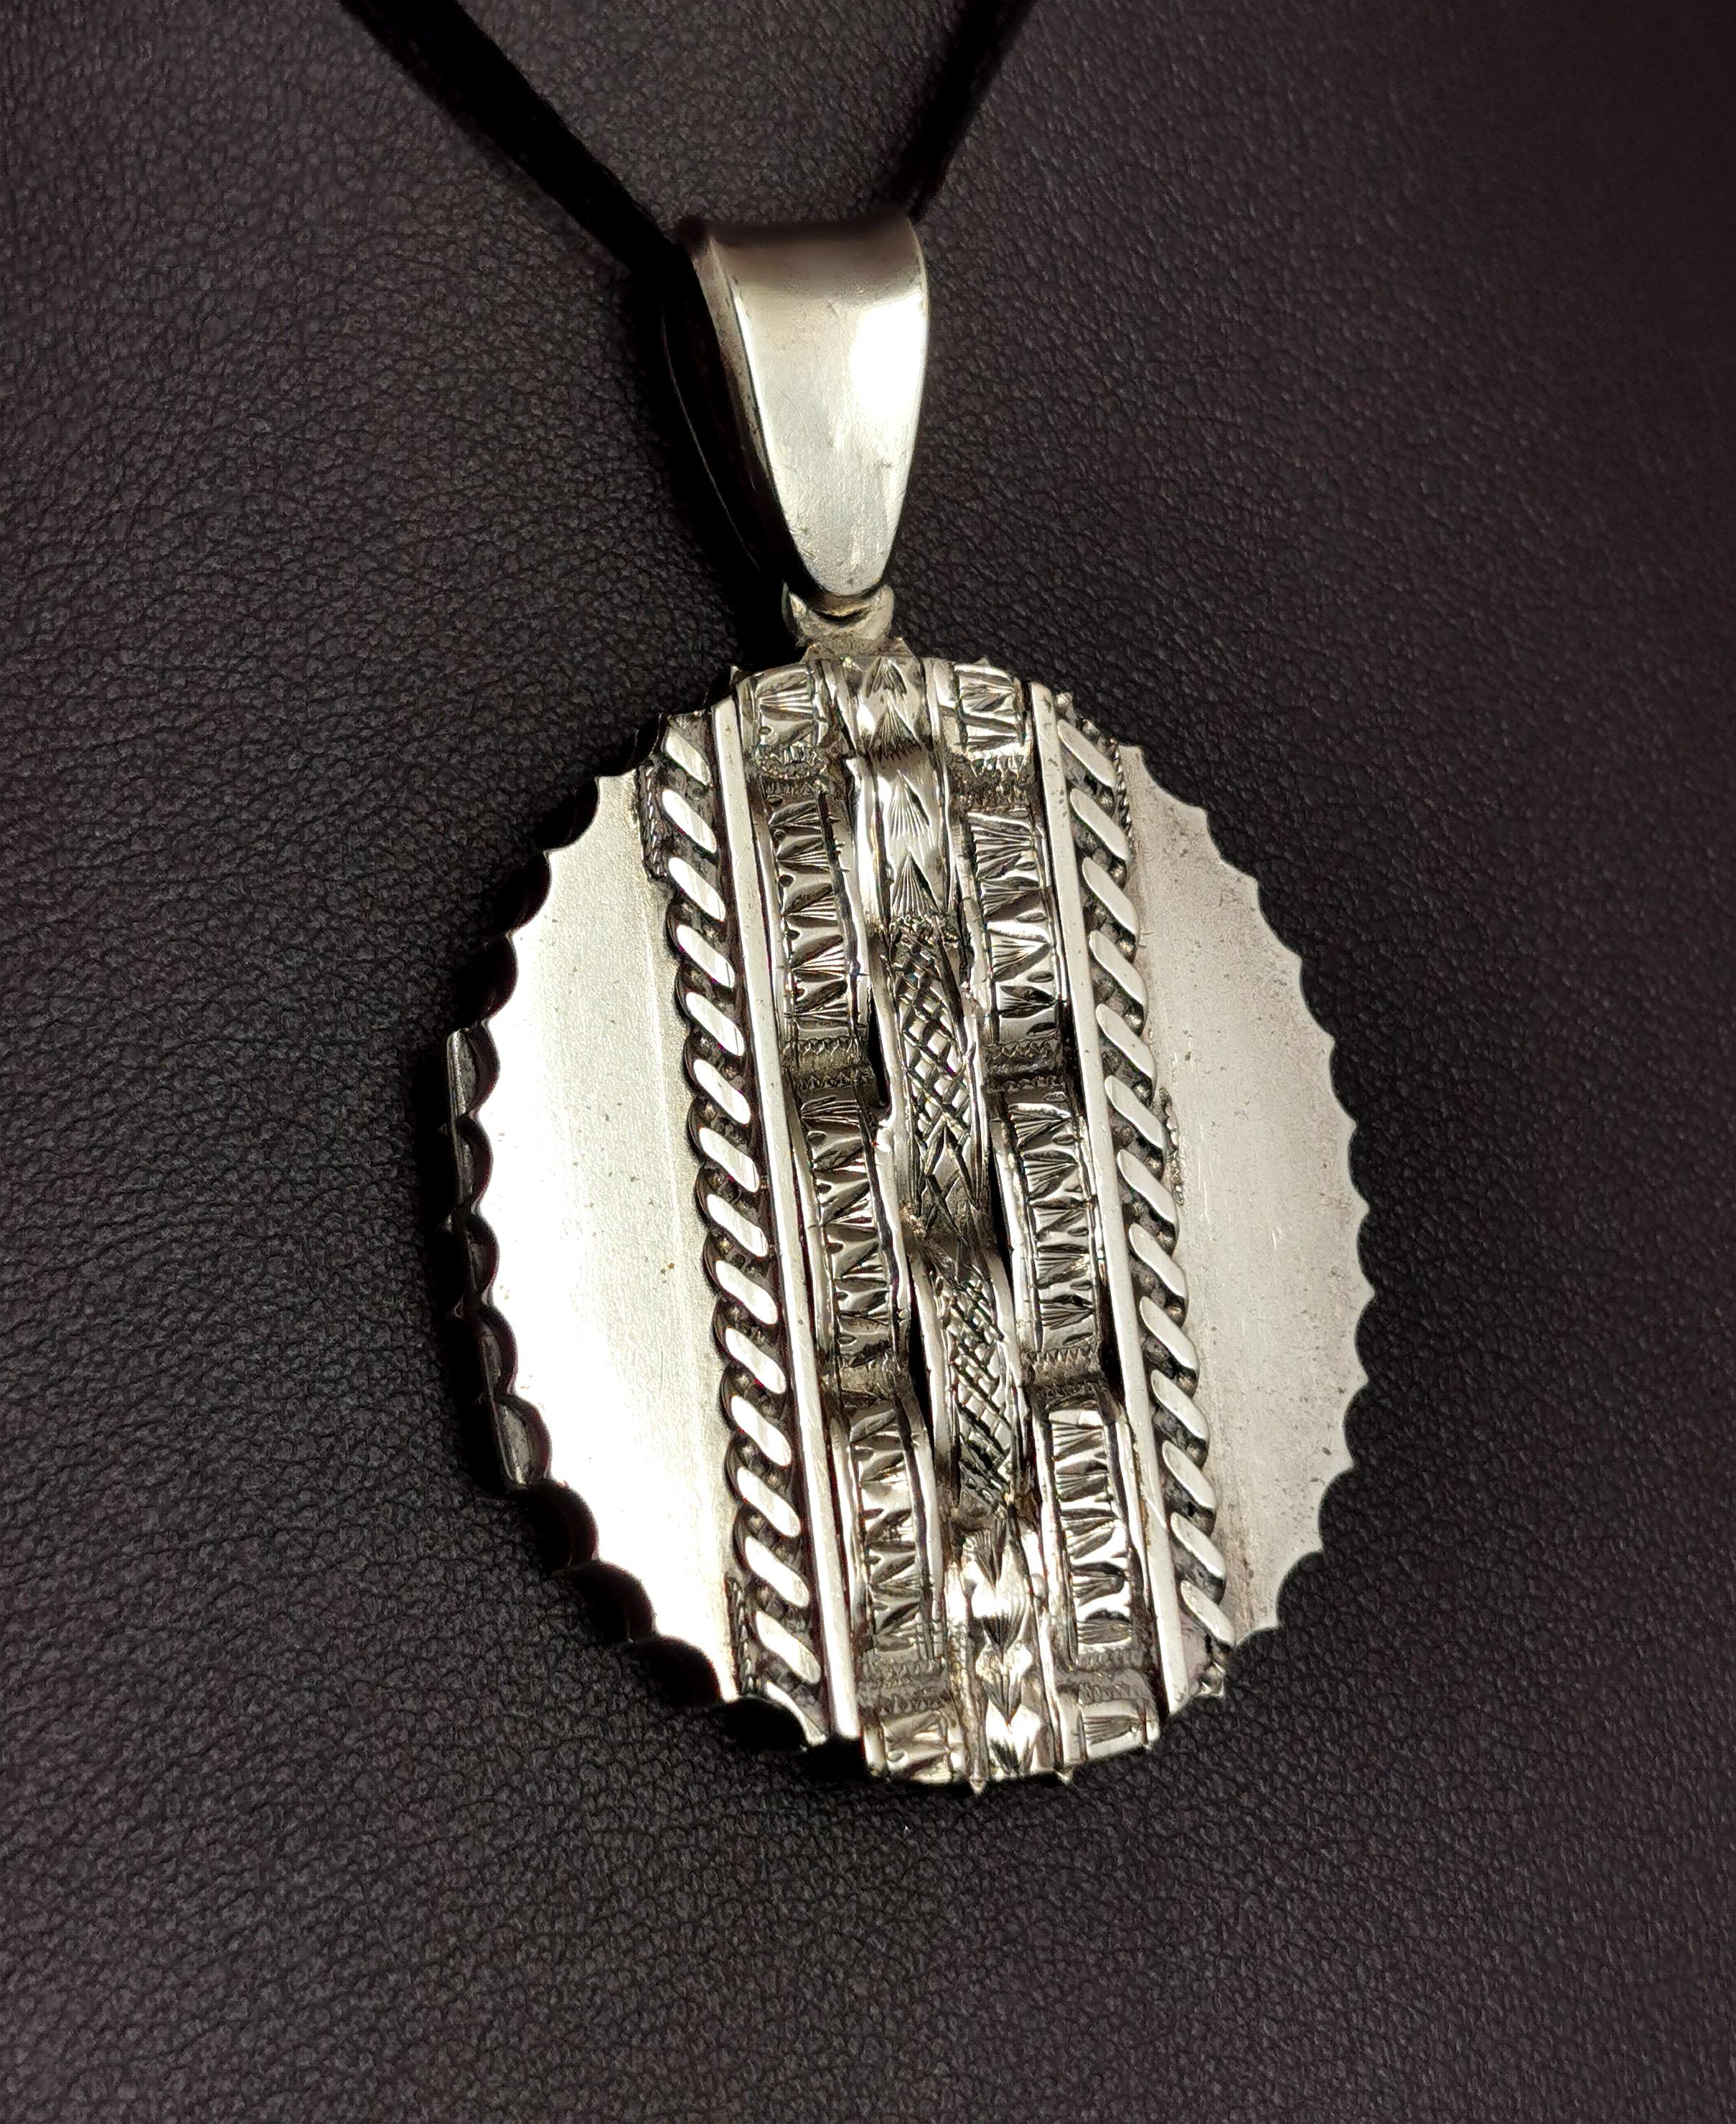 A beautiful antique Victorian sterling silver locket pendant.

It is engraved to the front with an unusual applied curved weave design down the front.

It has a large, integral bale and is an oval shape with a wavy zig zag edge.

The reverse of the